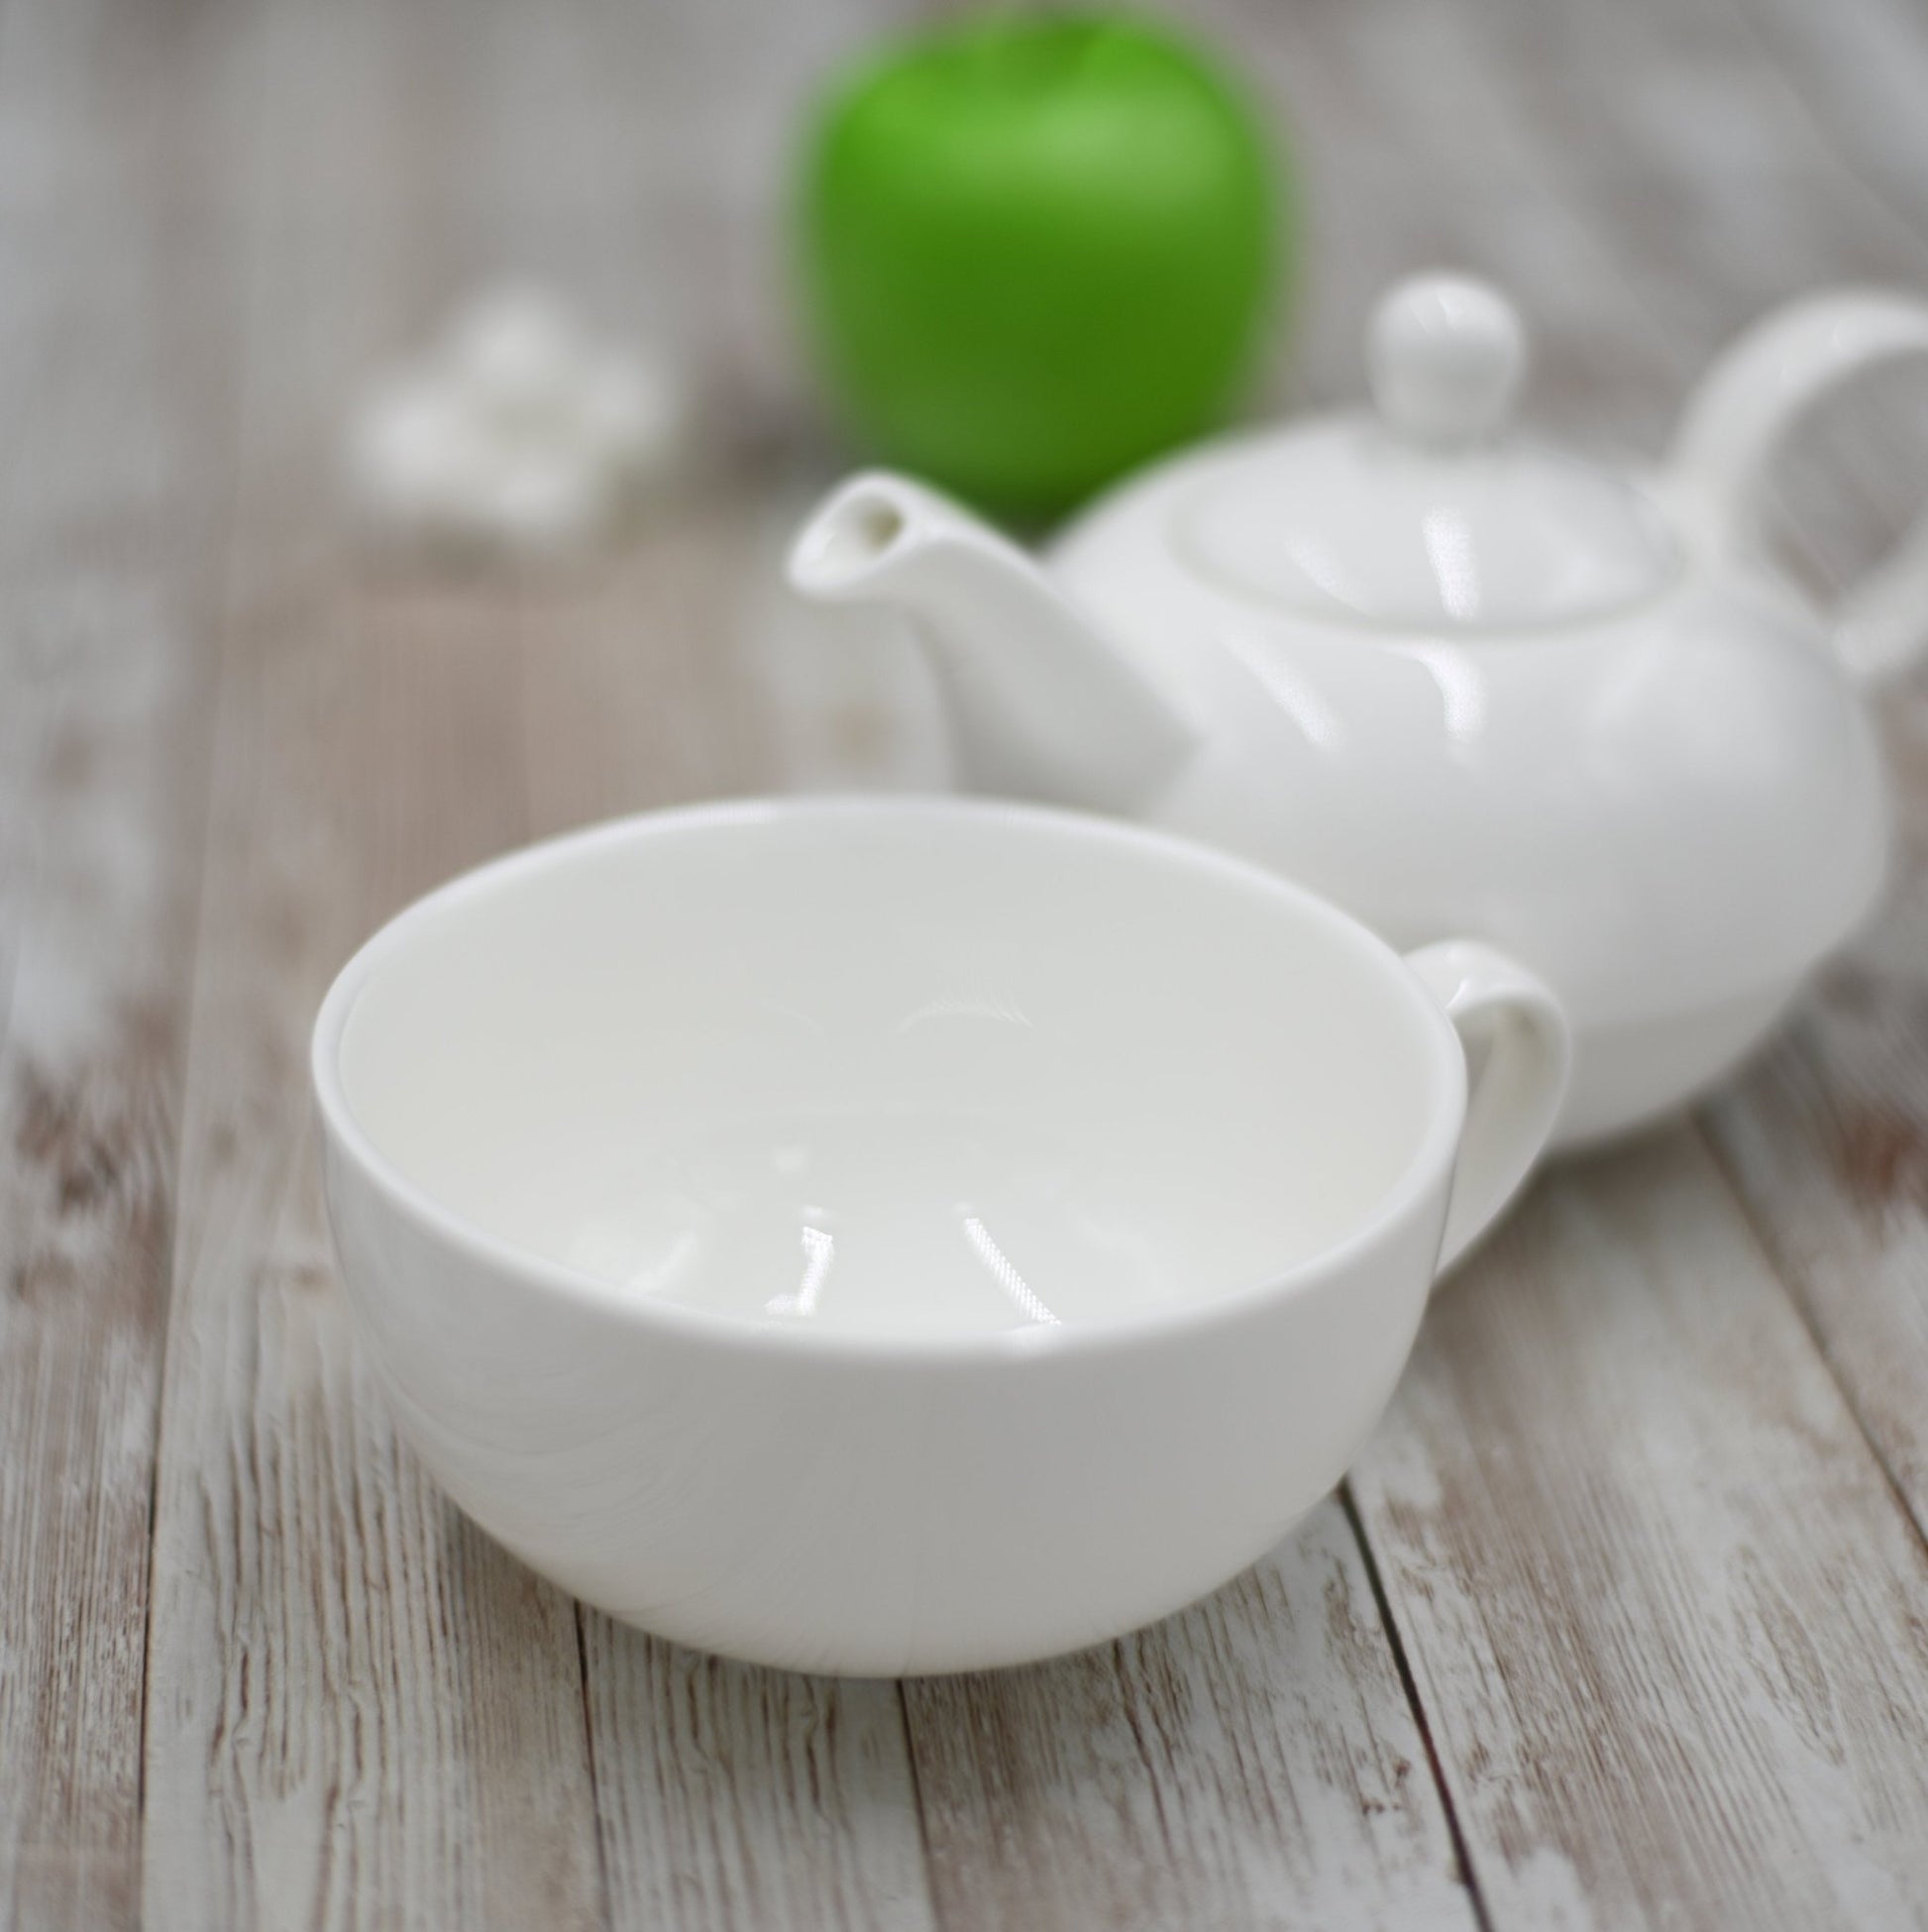 White Set: Teapot 13 Oz | 375 Ml & Cup 11 Oz | 340 Ml by Wilmax Porcelain Leaves of Leisure